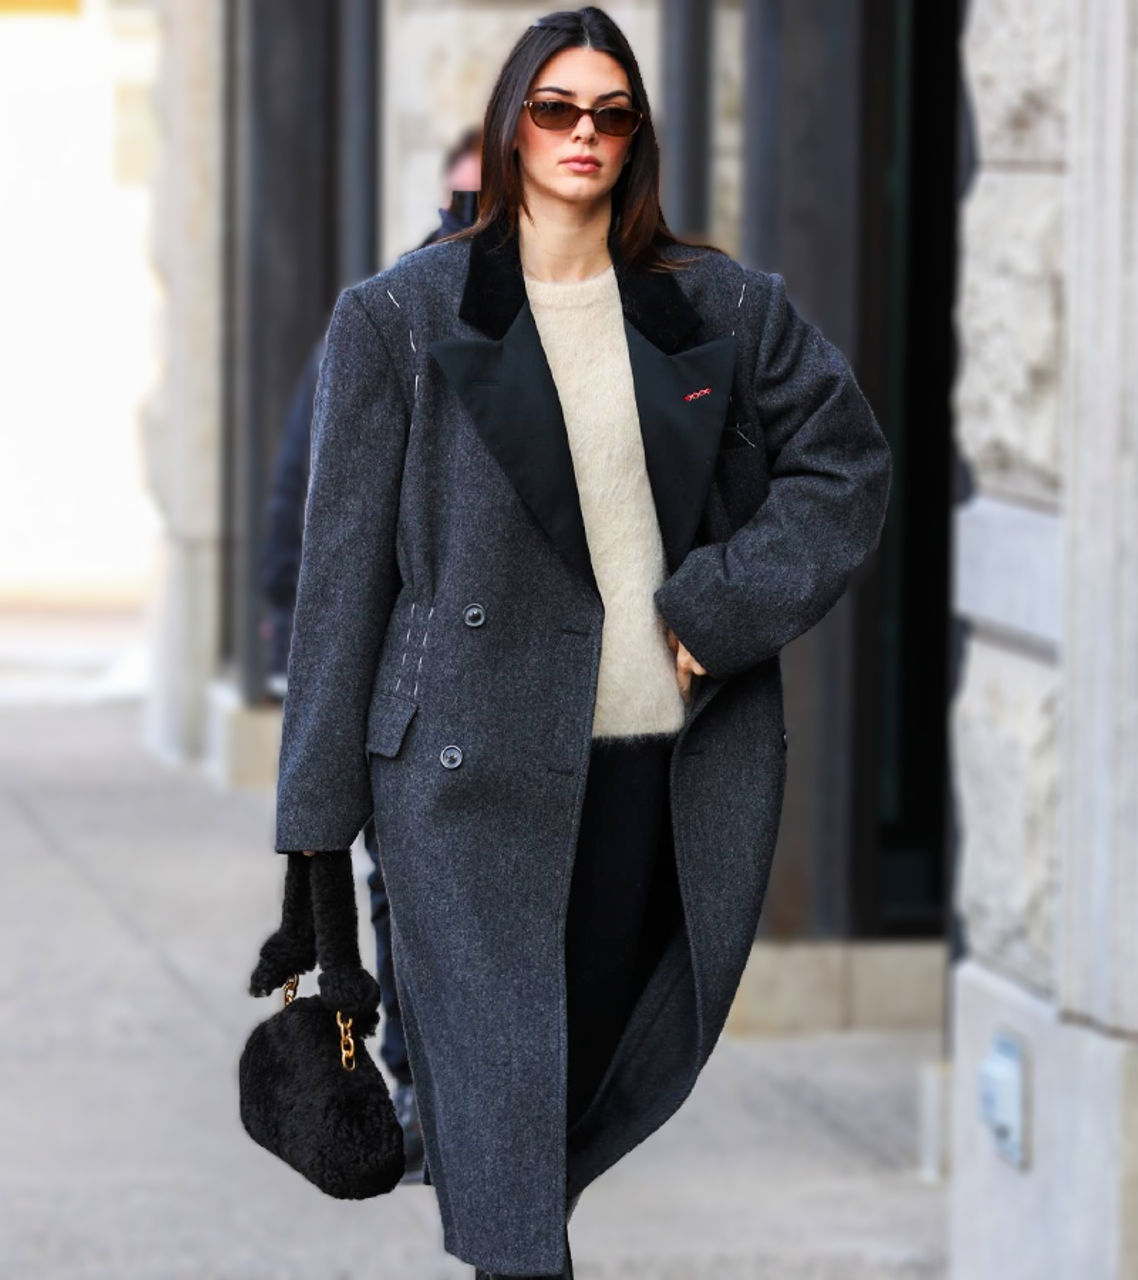 Kendall Jenner Airport Outfit 2021 | lupon.gov.ph